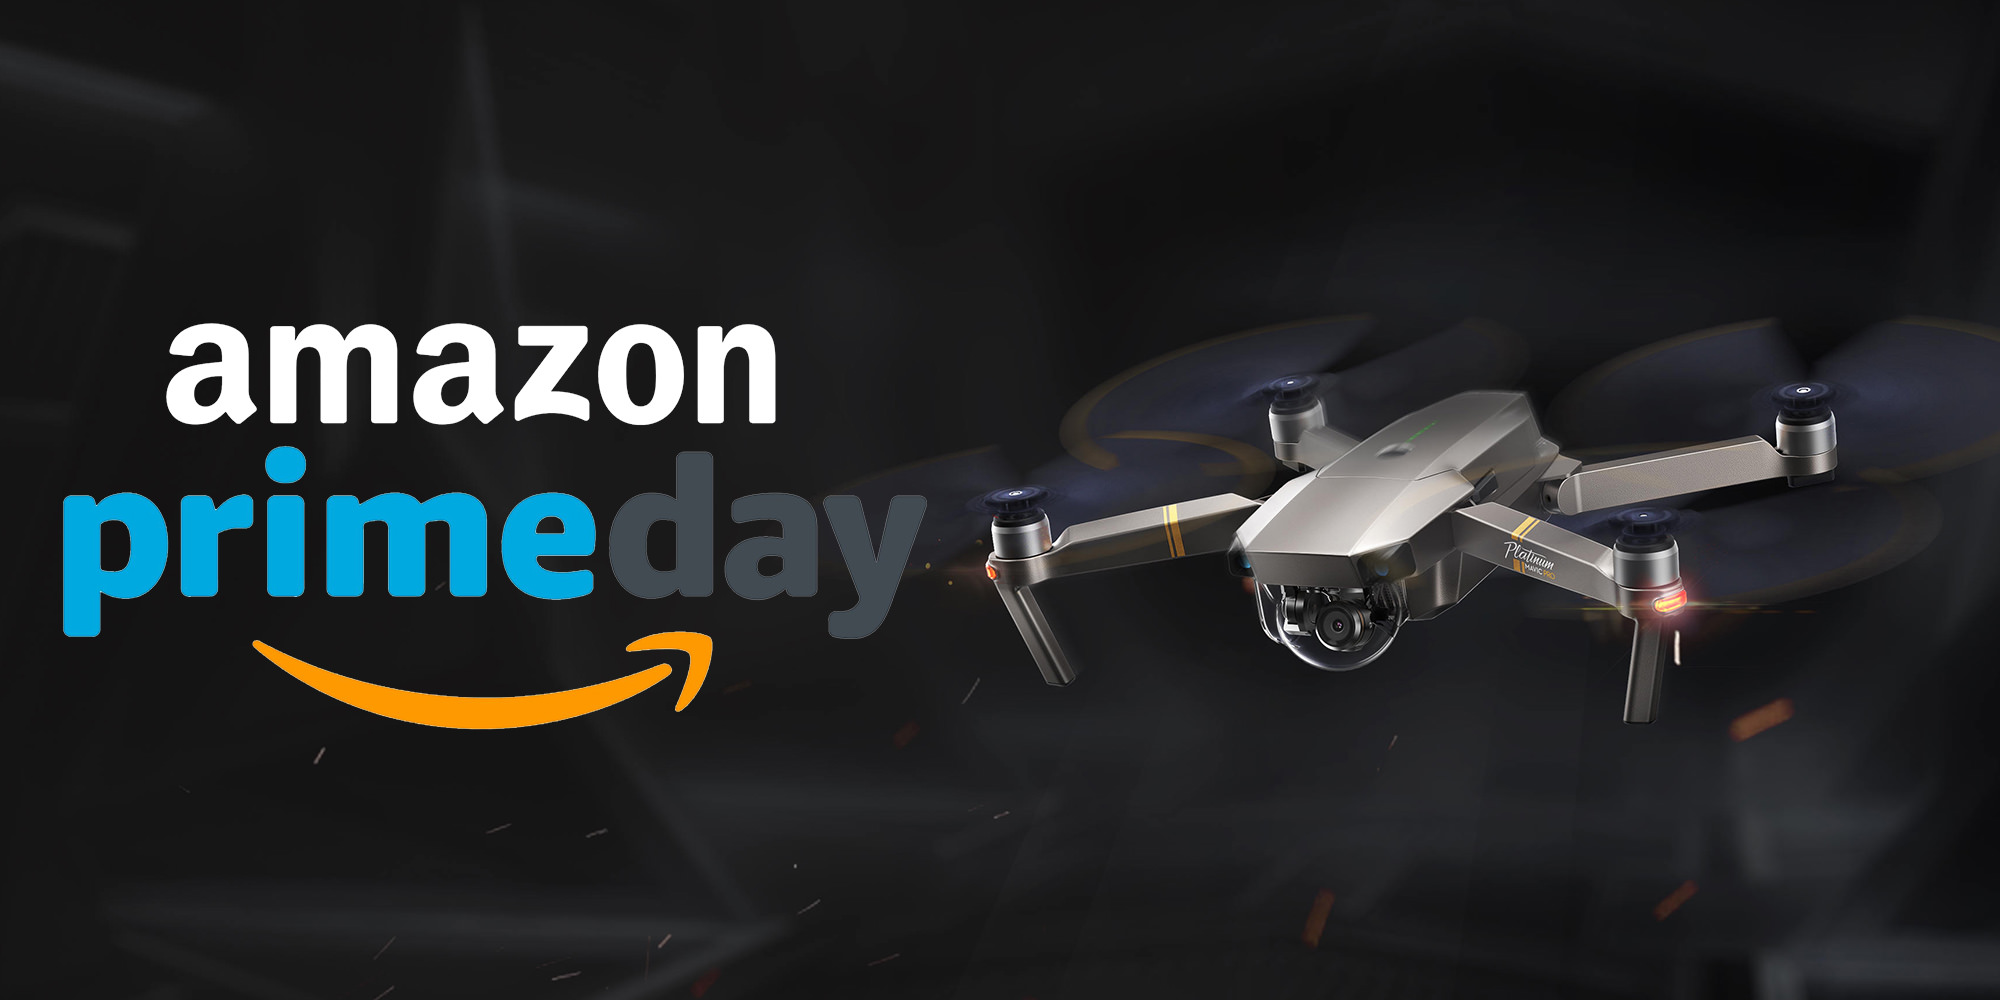 DJI lowers prices on Spark and Mavic Pro drones during Amazon Prime Day on July 16th